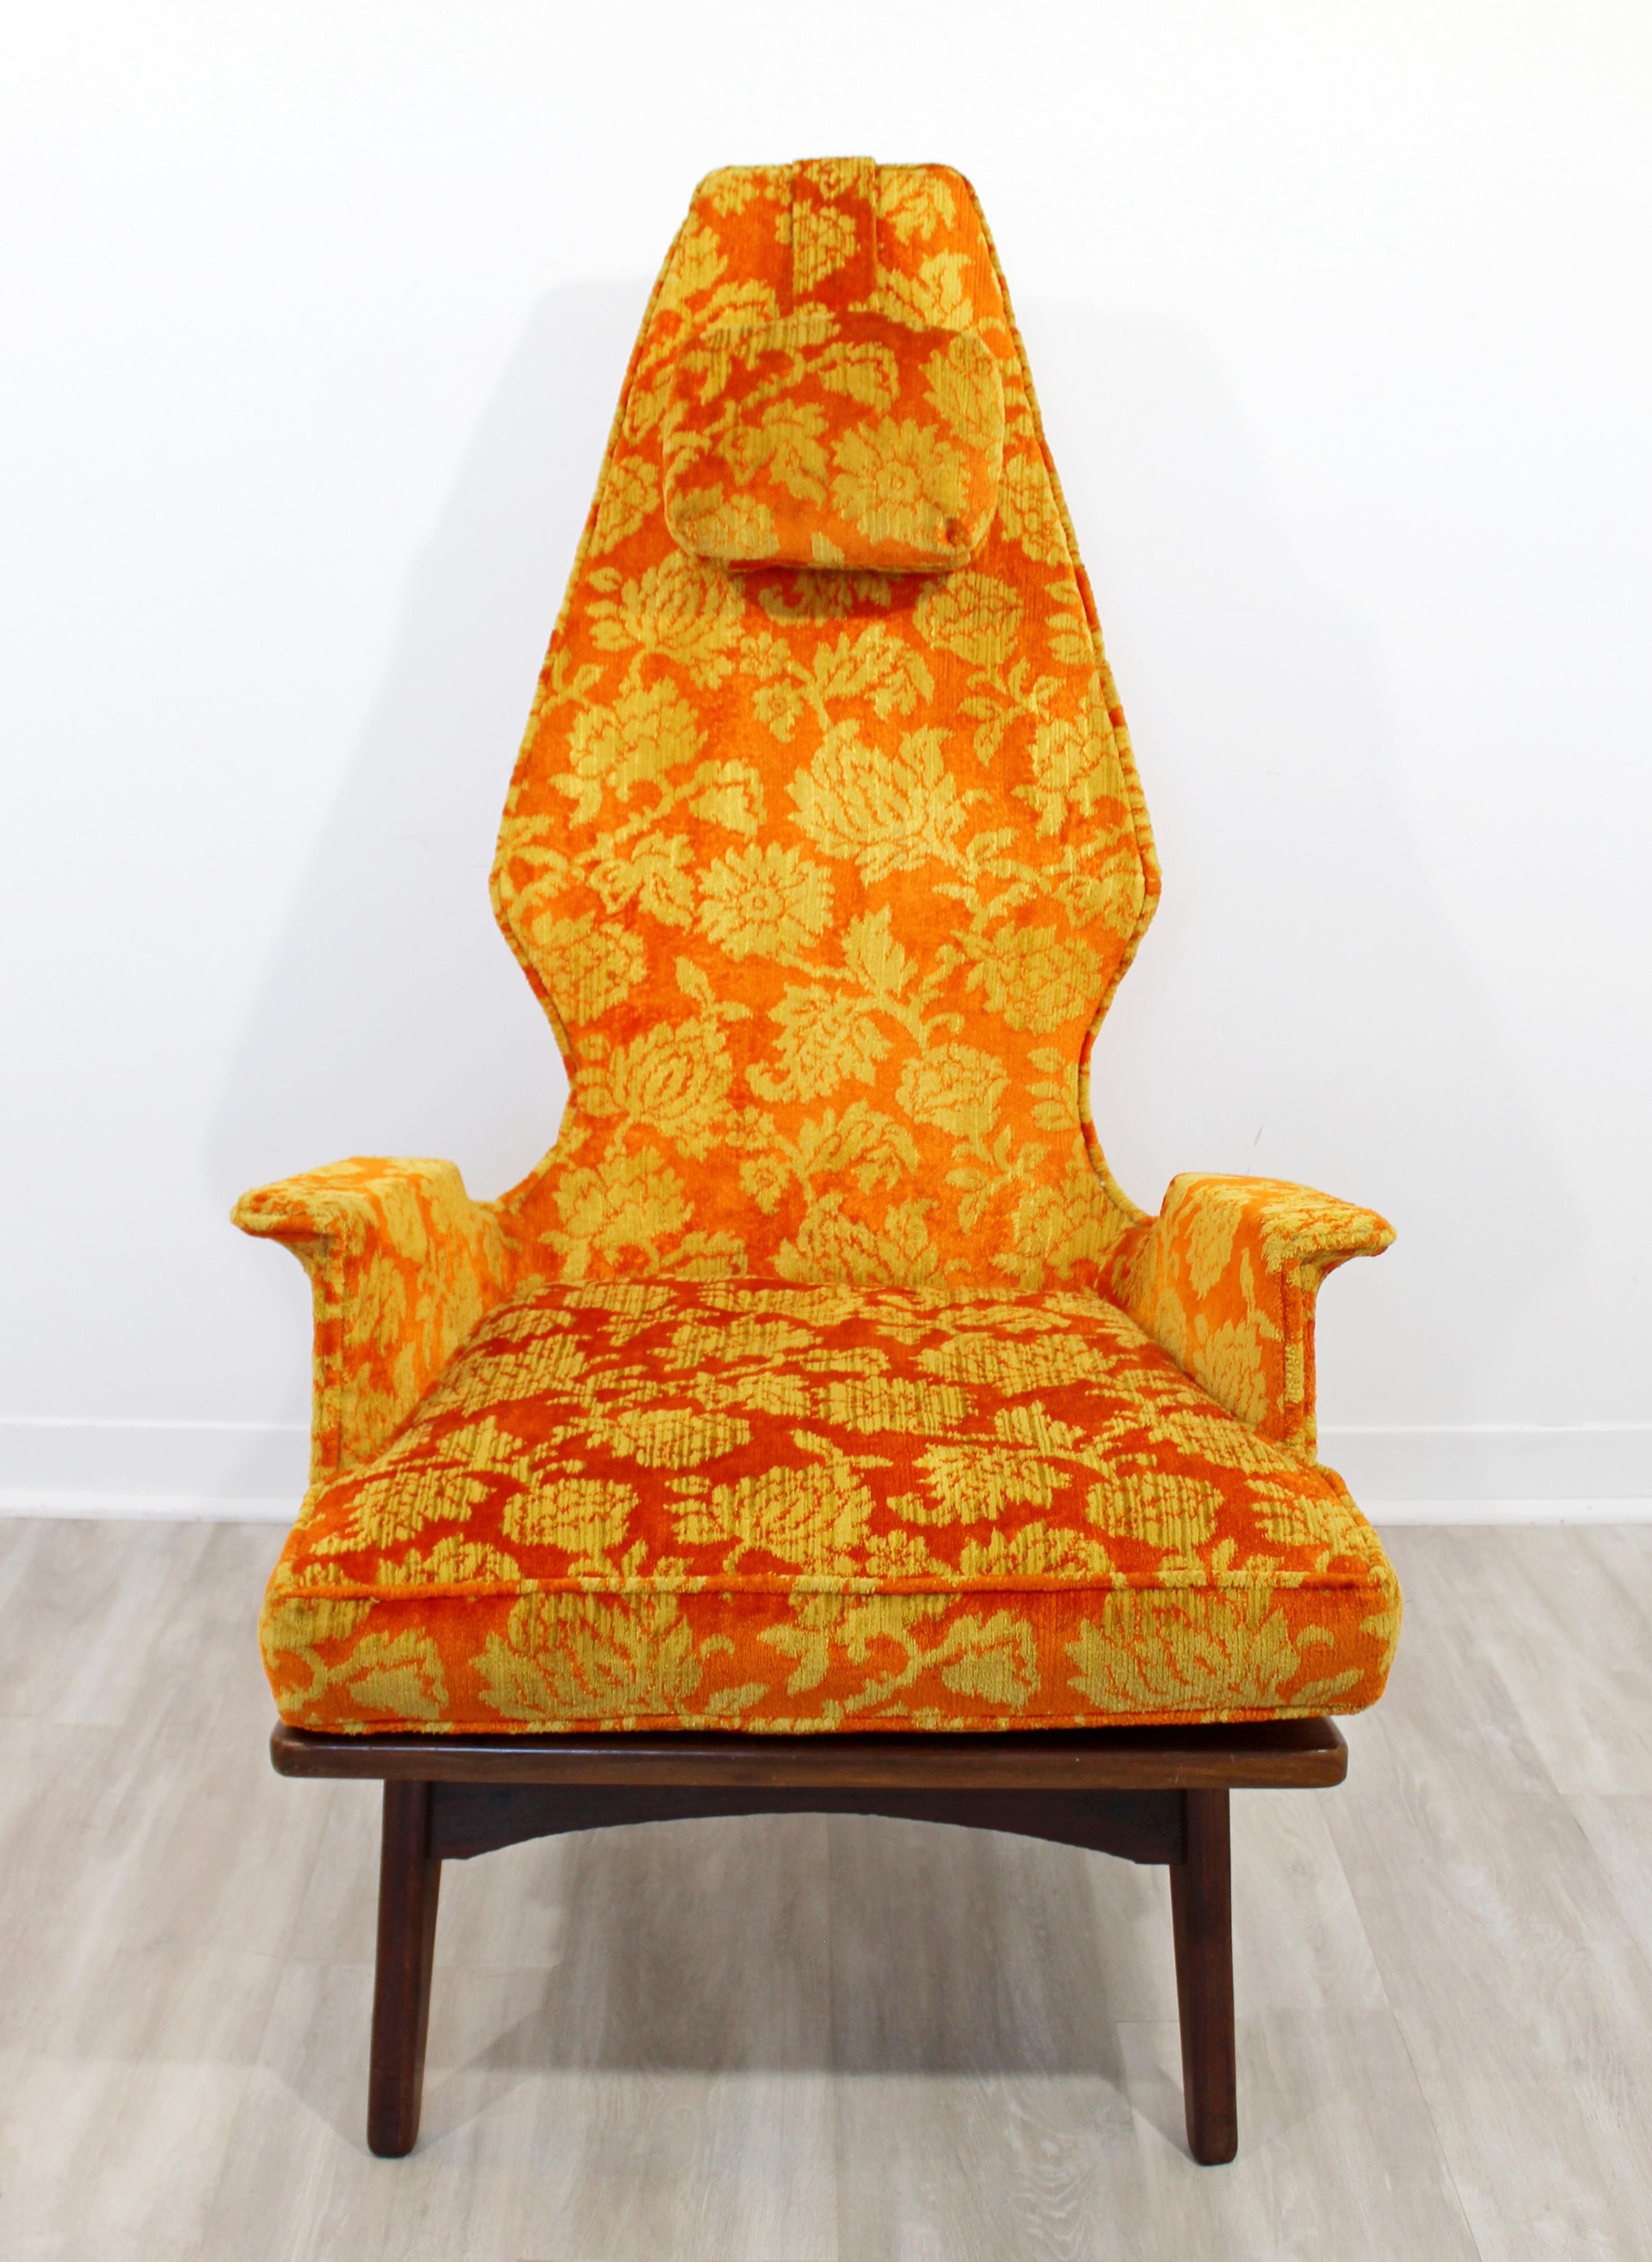 For your consideration is an utterly fabulous, high backed lounge or accent chair, with the original headrest, by Adrian Pearsall, circa 1960s. In very good vintage condition. The dimensions are 29